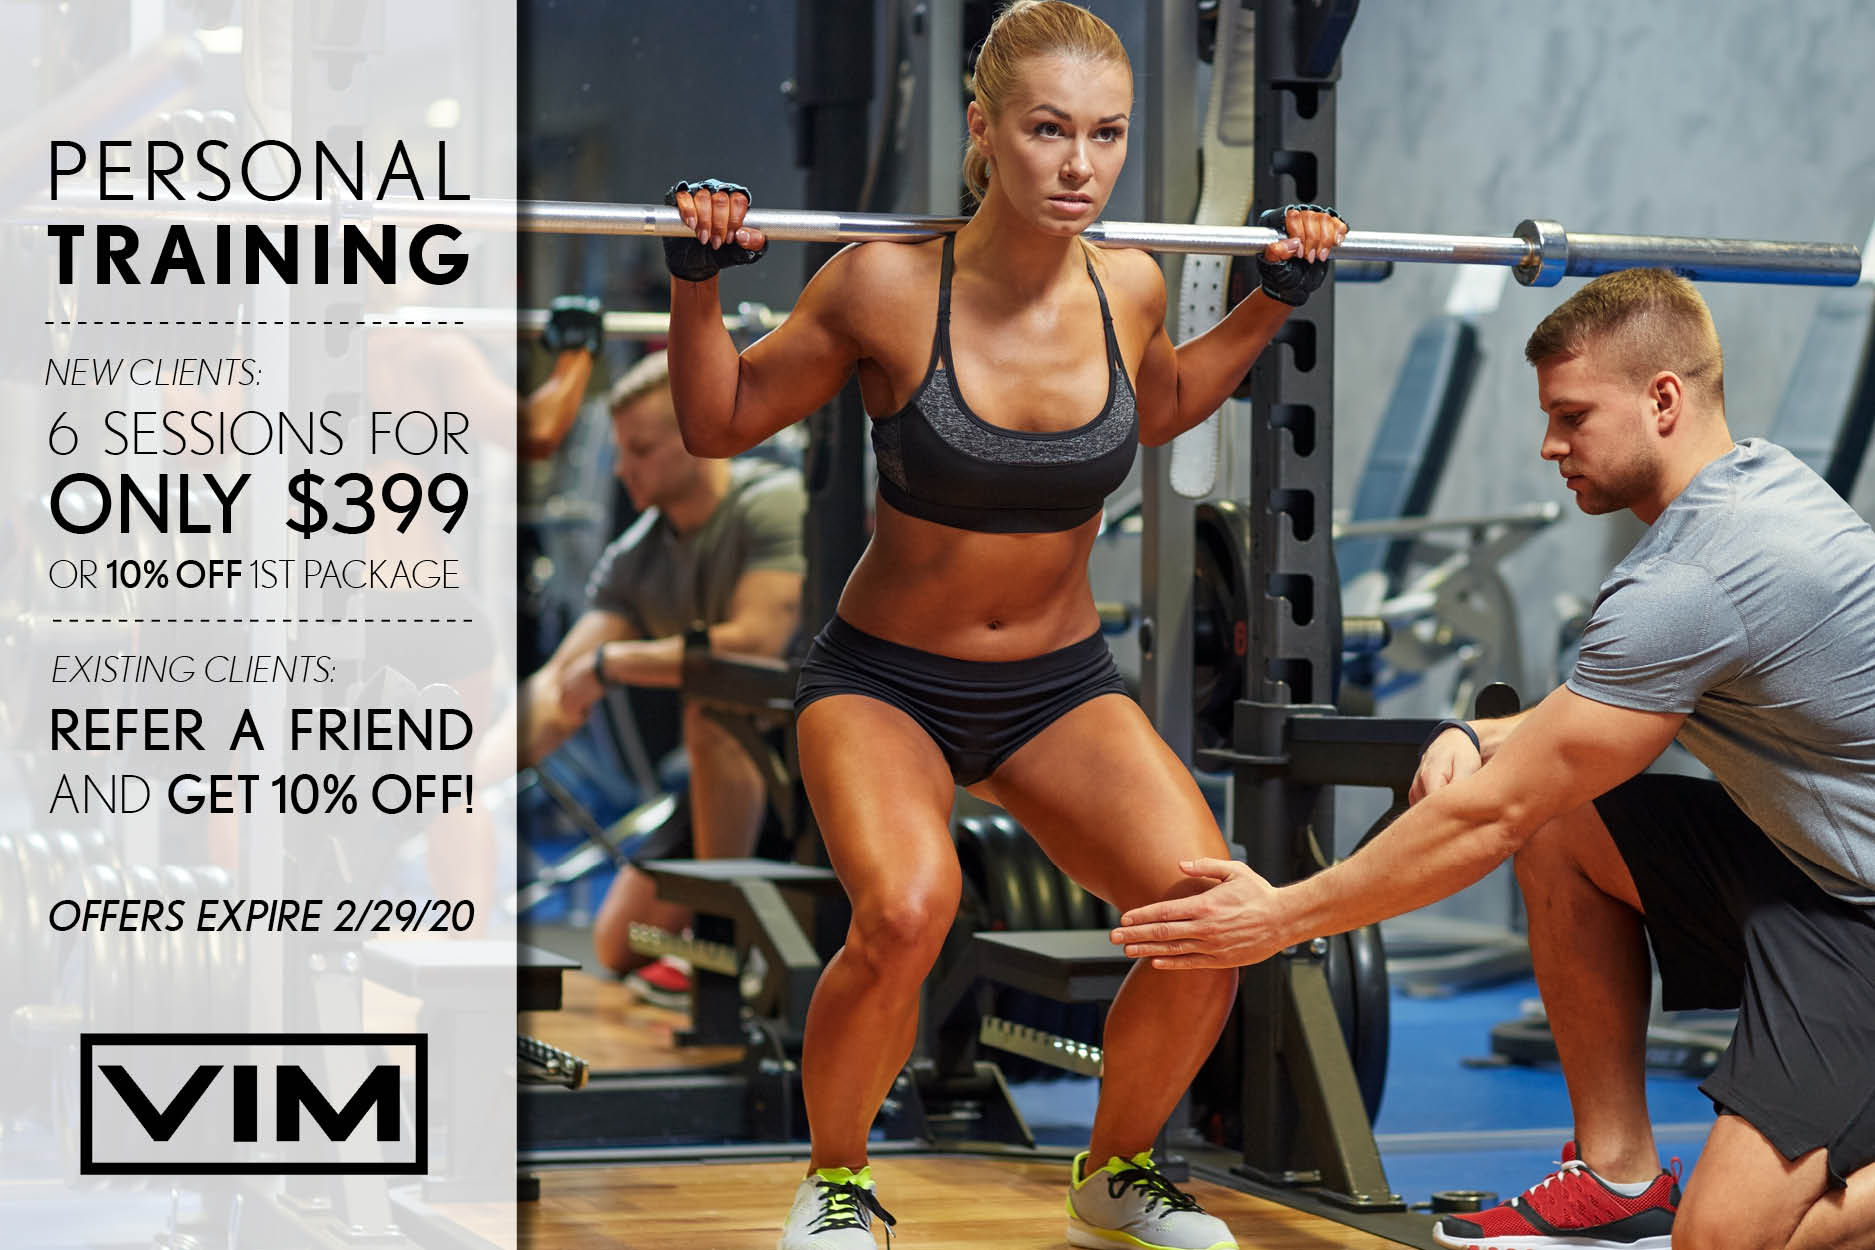 Personal Training 6 Sessions for ONLY 399 VIM Fitness